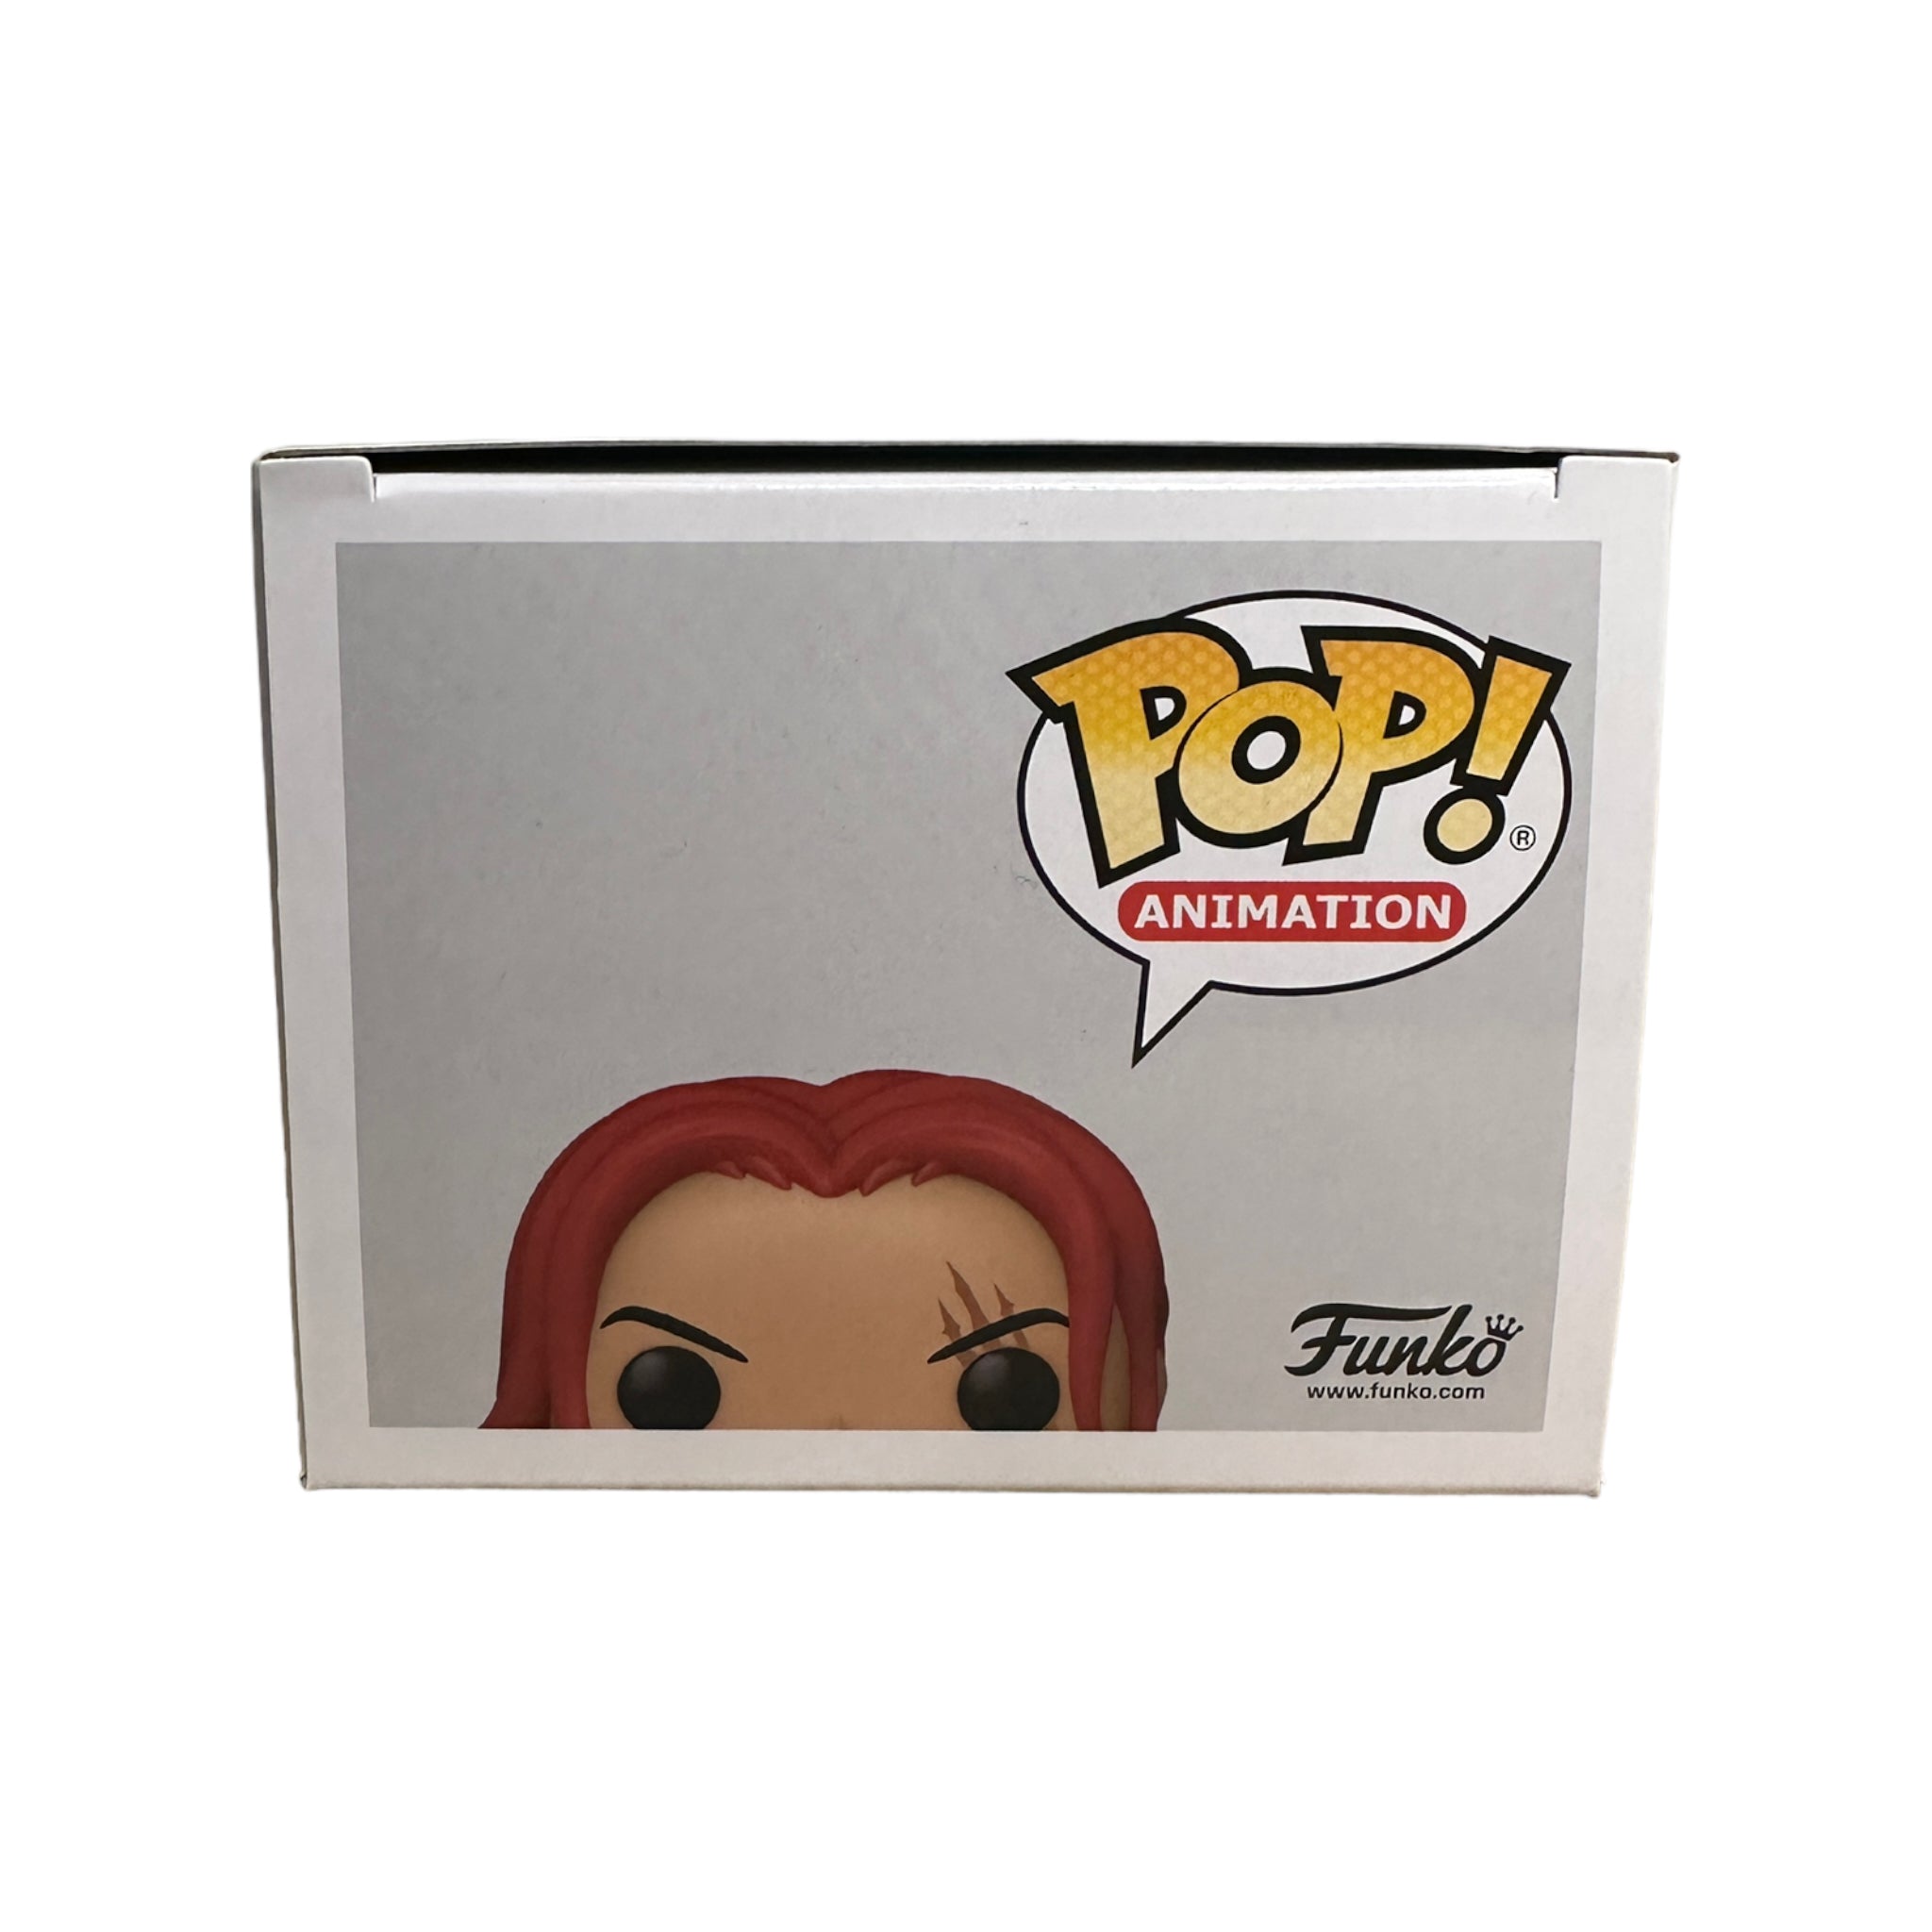 Shanks #939 (w/ Hat Chase) Funko Pop! - One Piece - Special Edition - Condition 9/10